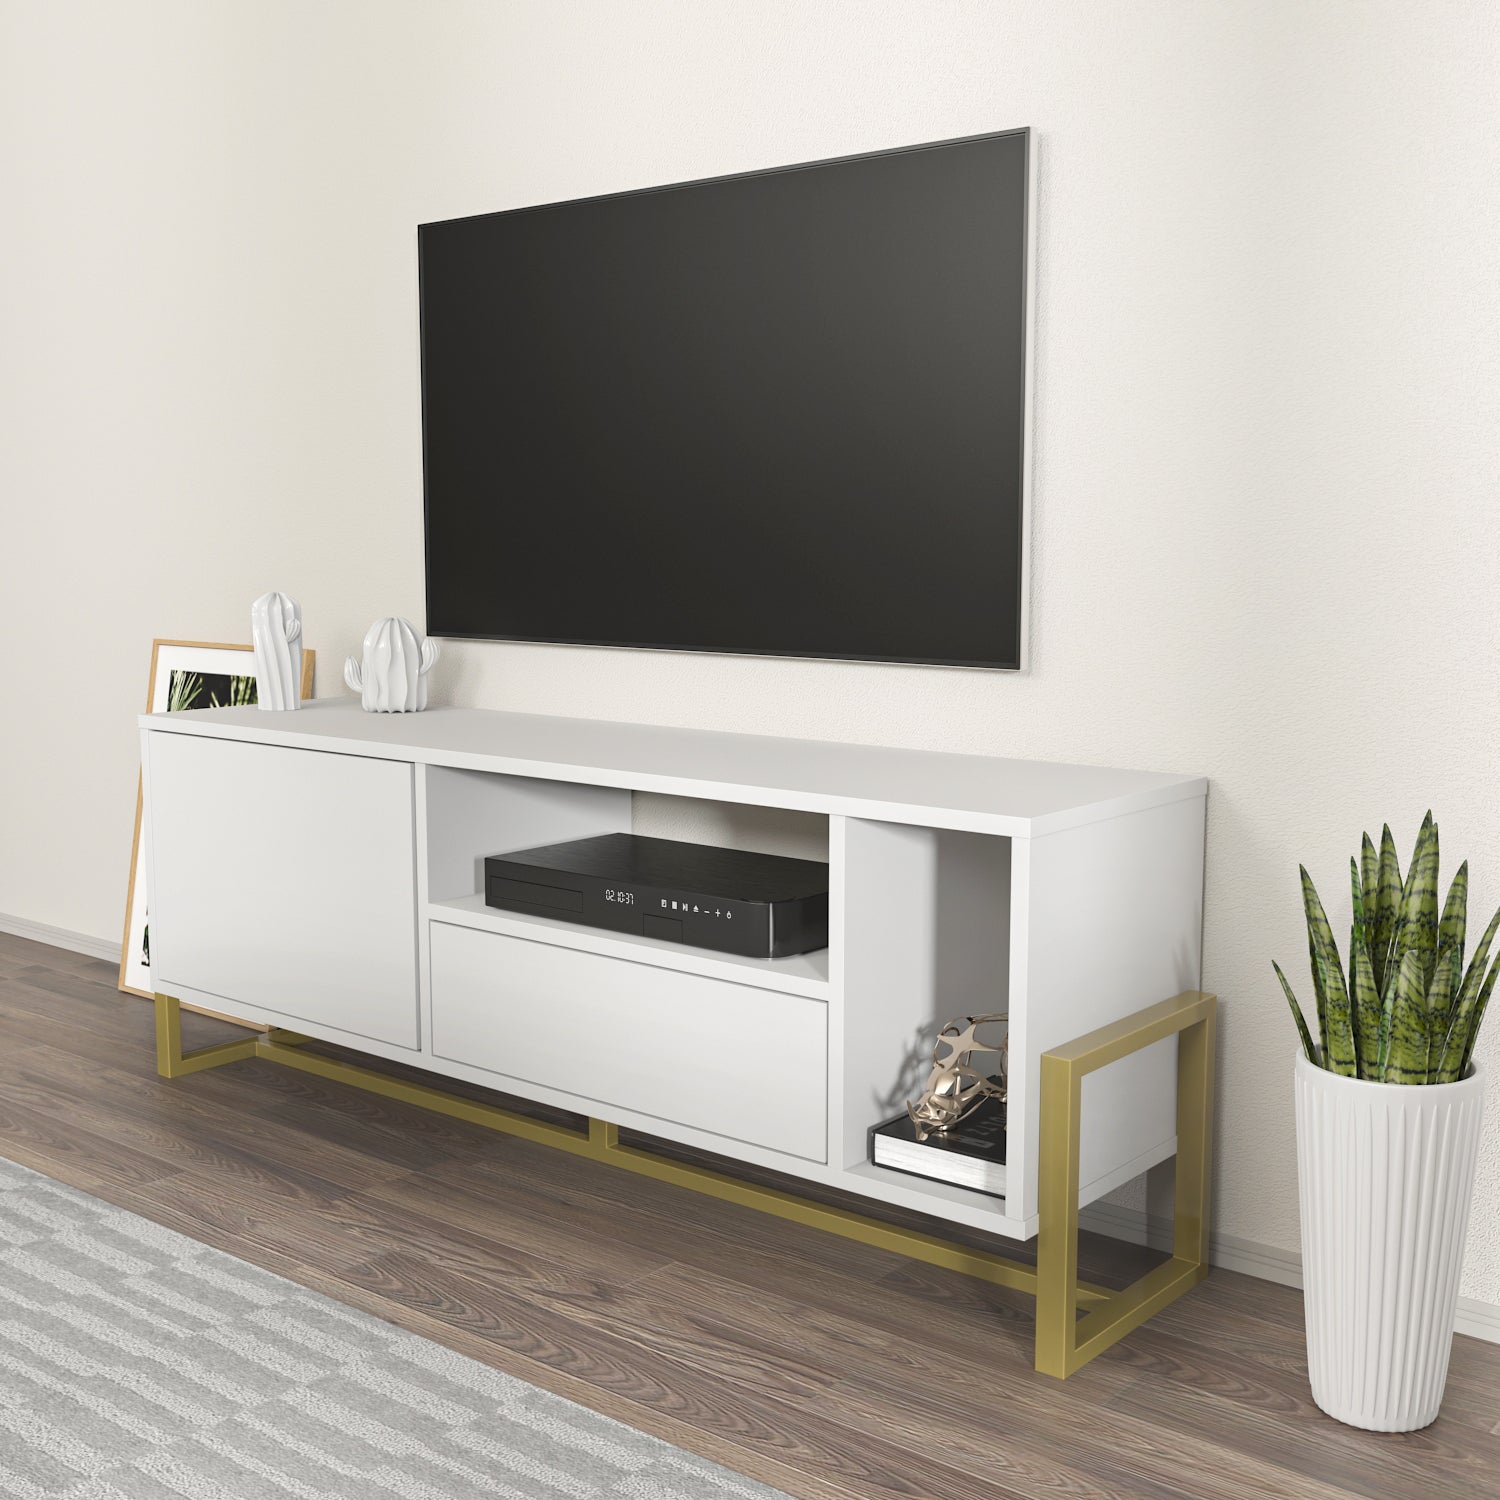 Utopia 55.1" Wide Modern TV Stand with Metal Legs | TV Console with Storage Cabinet